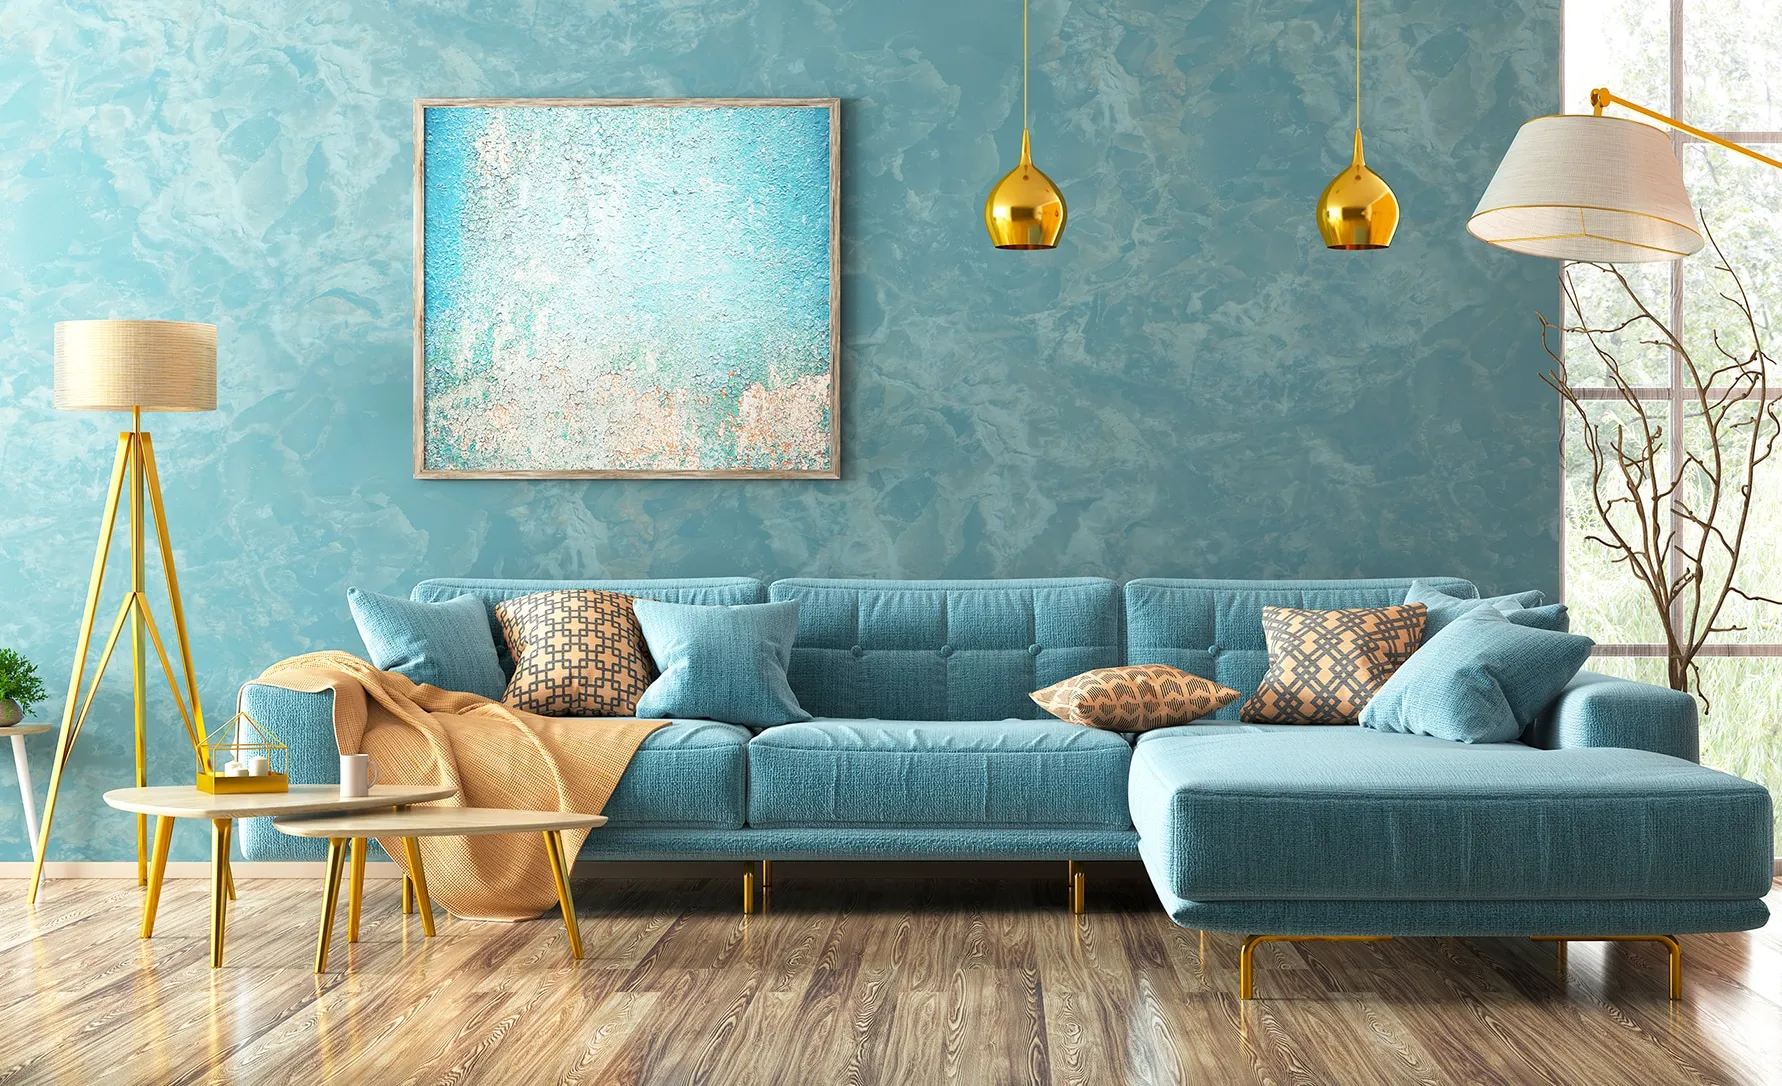 Modern interior of living room with blue corner sofa, coffee tables, floor lamp